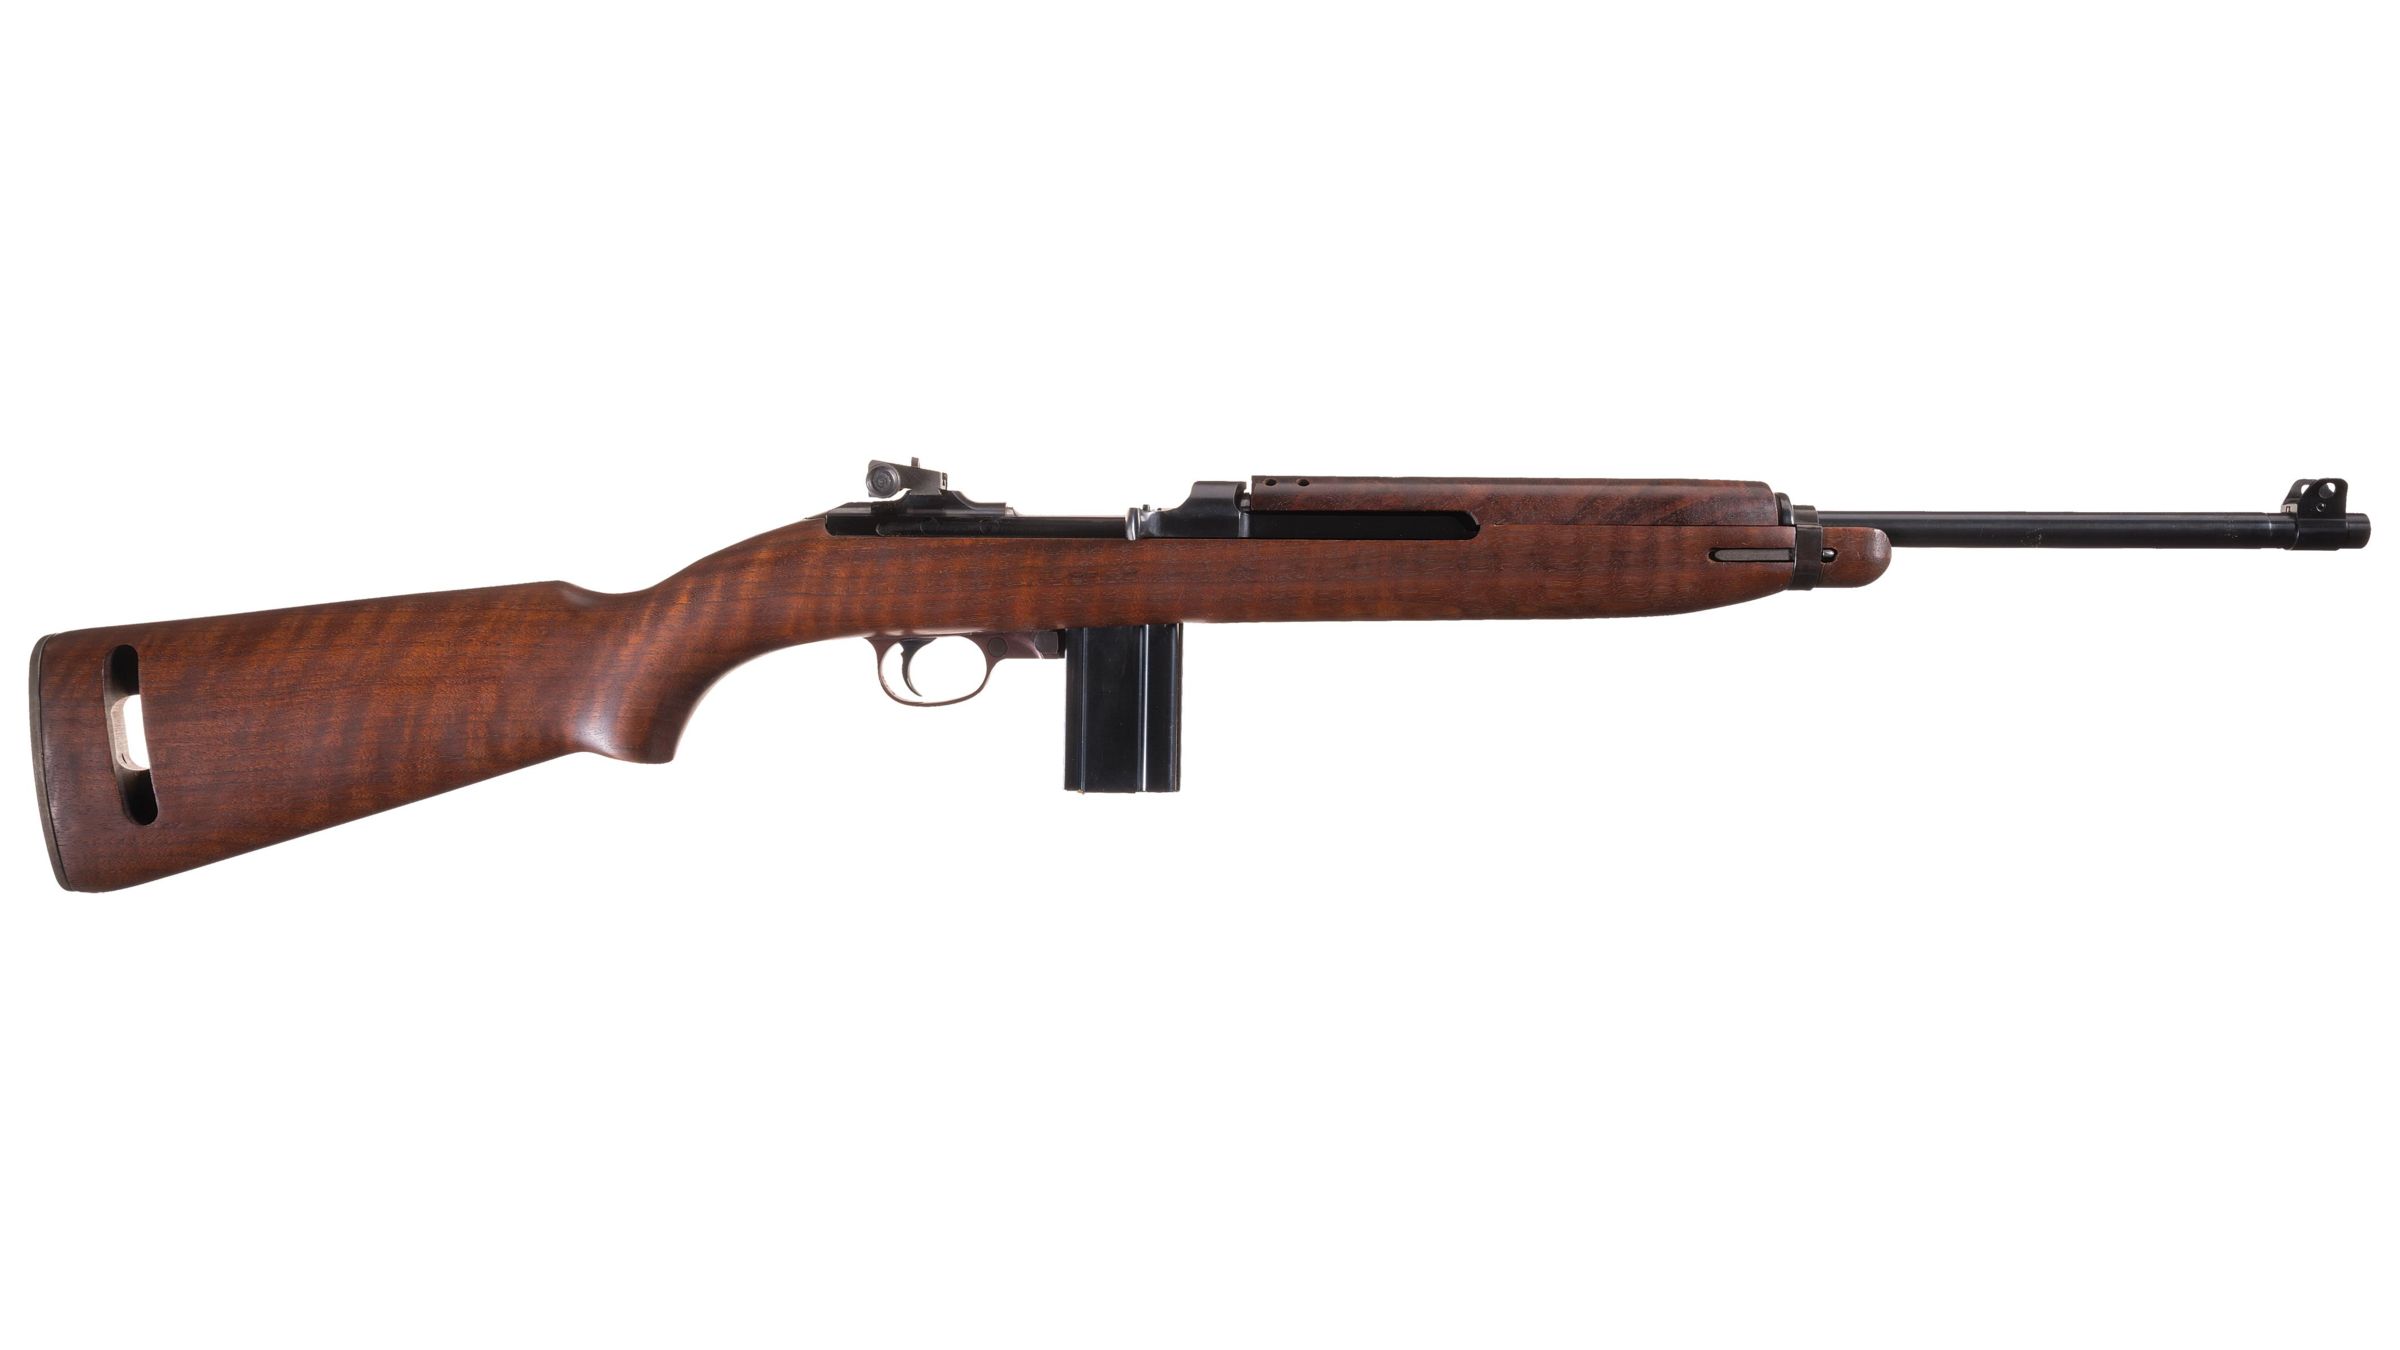 M1 Carbine Safety NOS unmarked Type 2